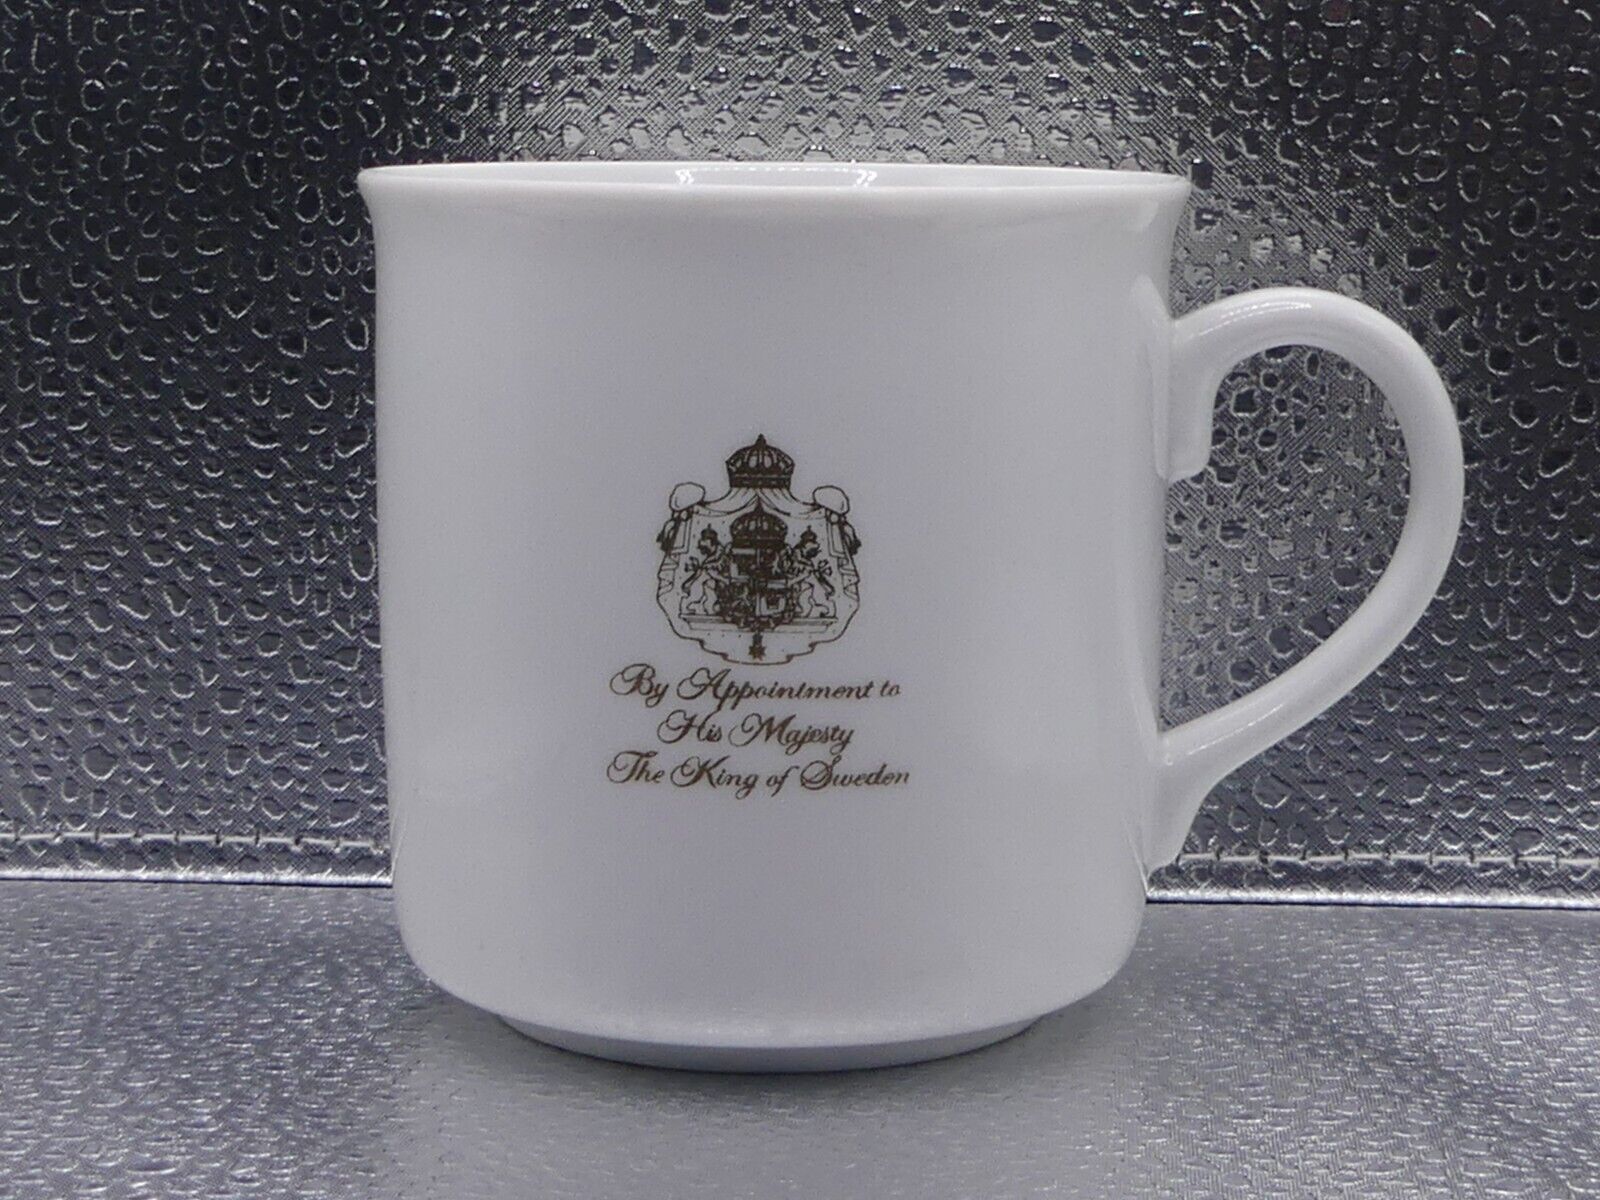 Gevalia Kaffe By Appointment To His Majesty The King Of Sweden White Mug Cup